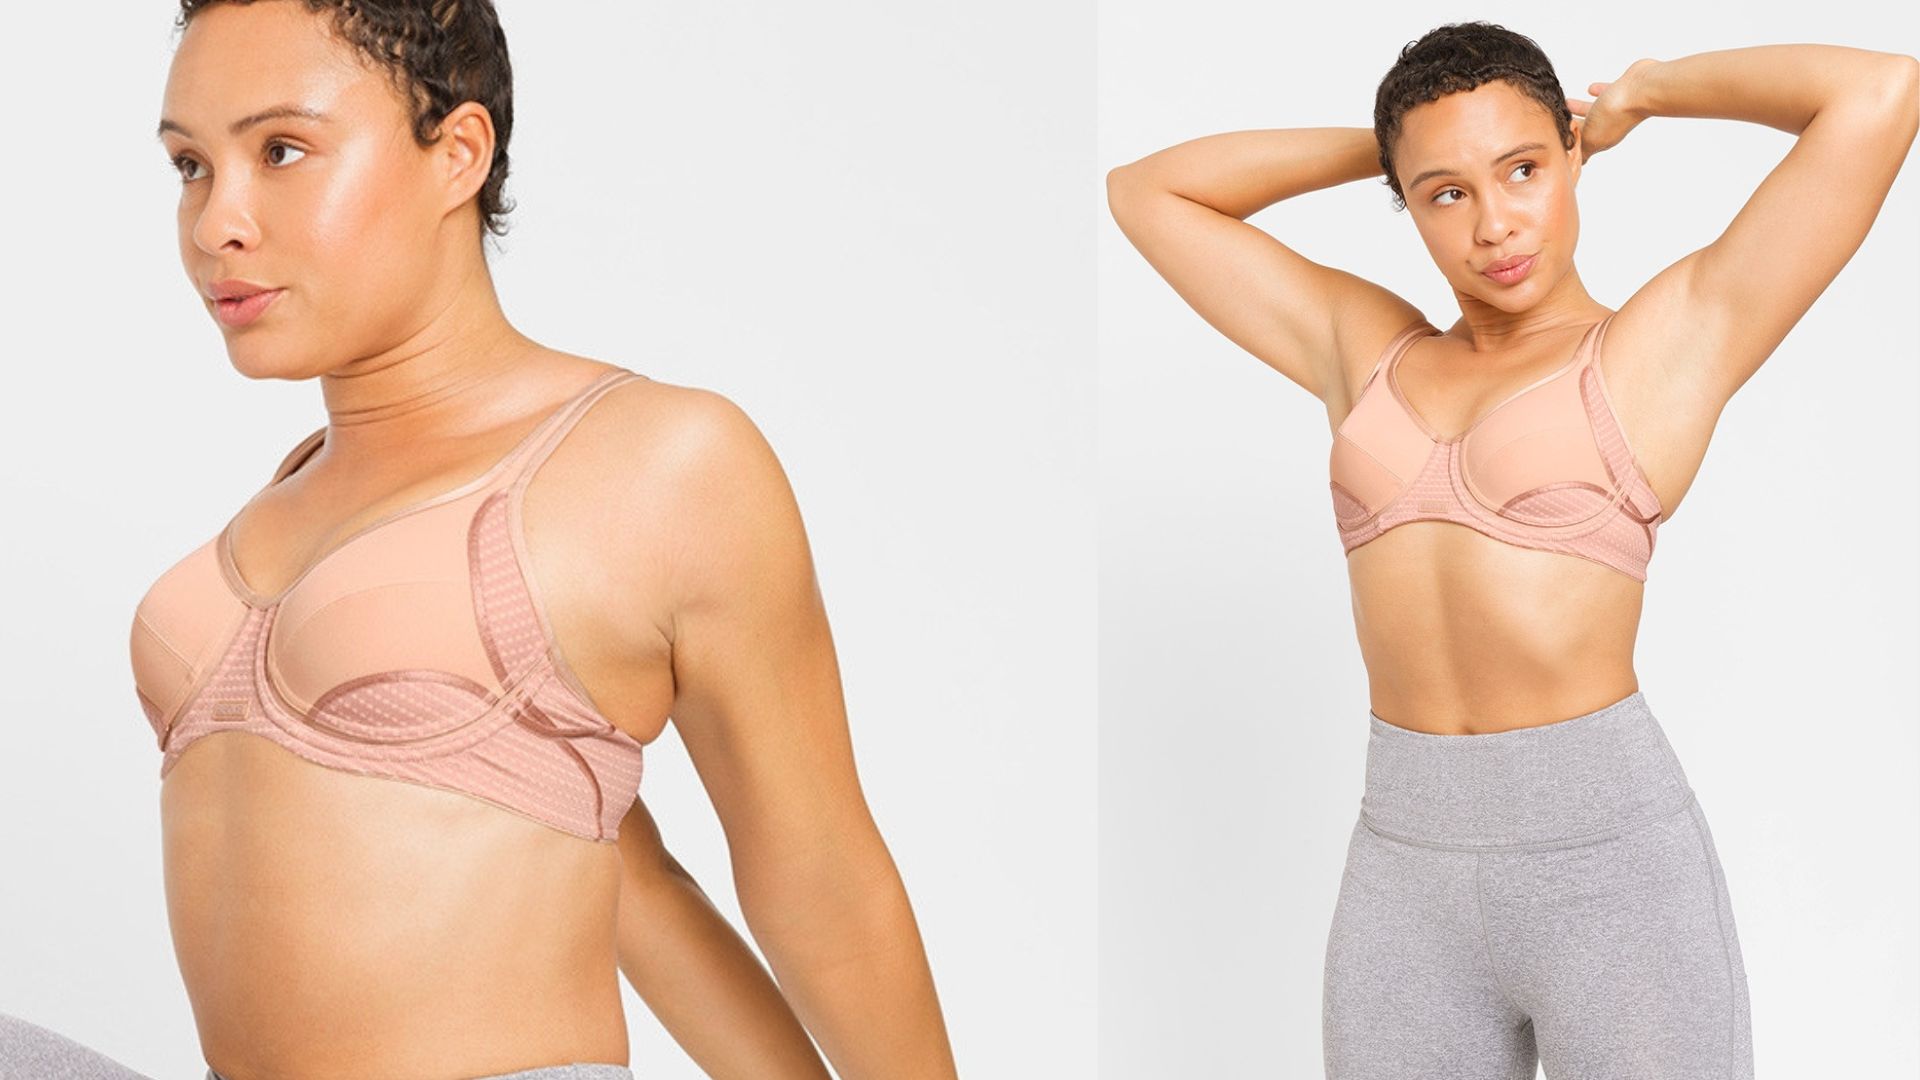 5 Things to Look For in a Good Sports Bra